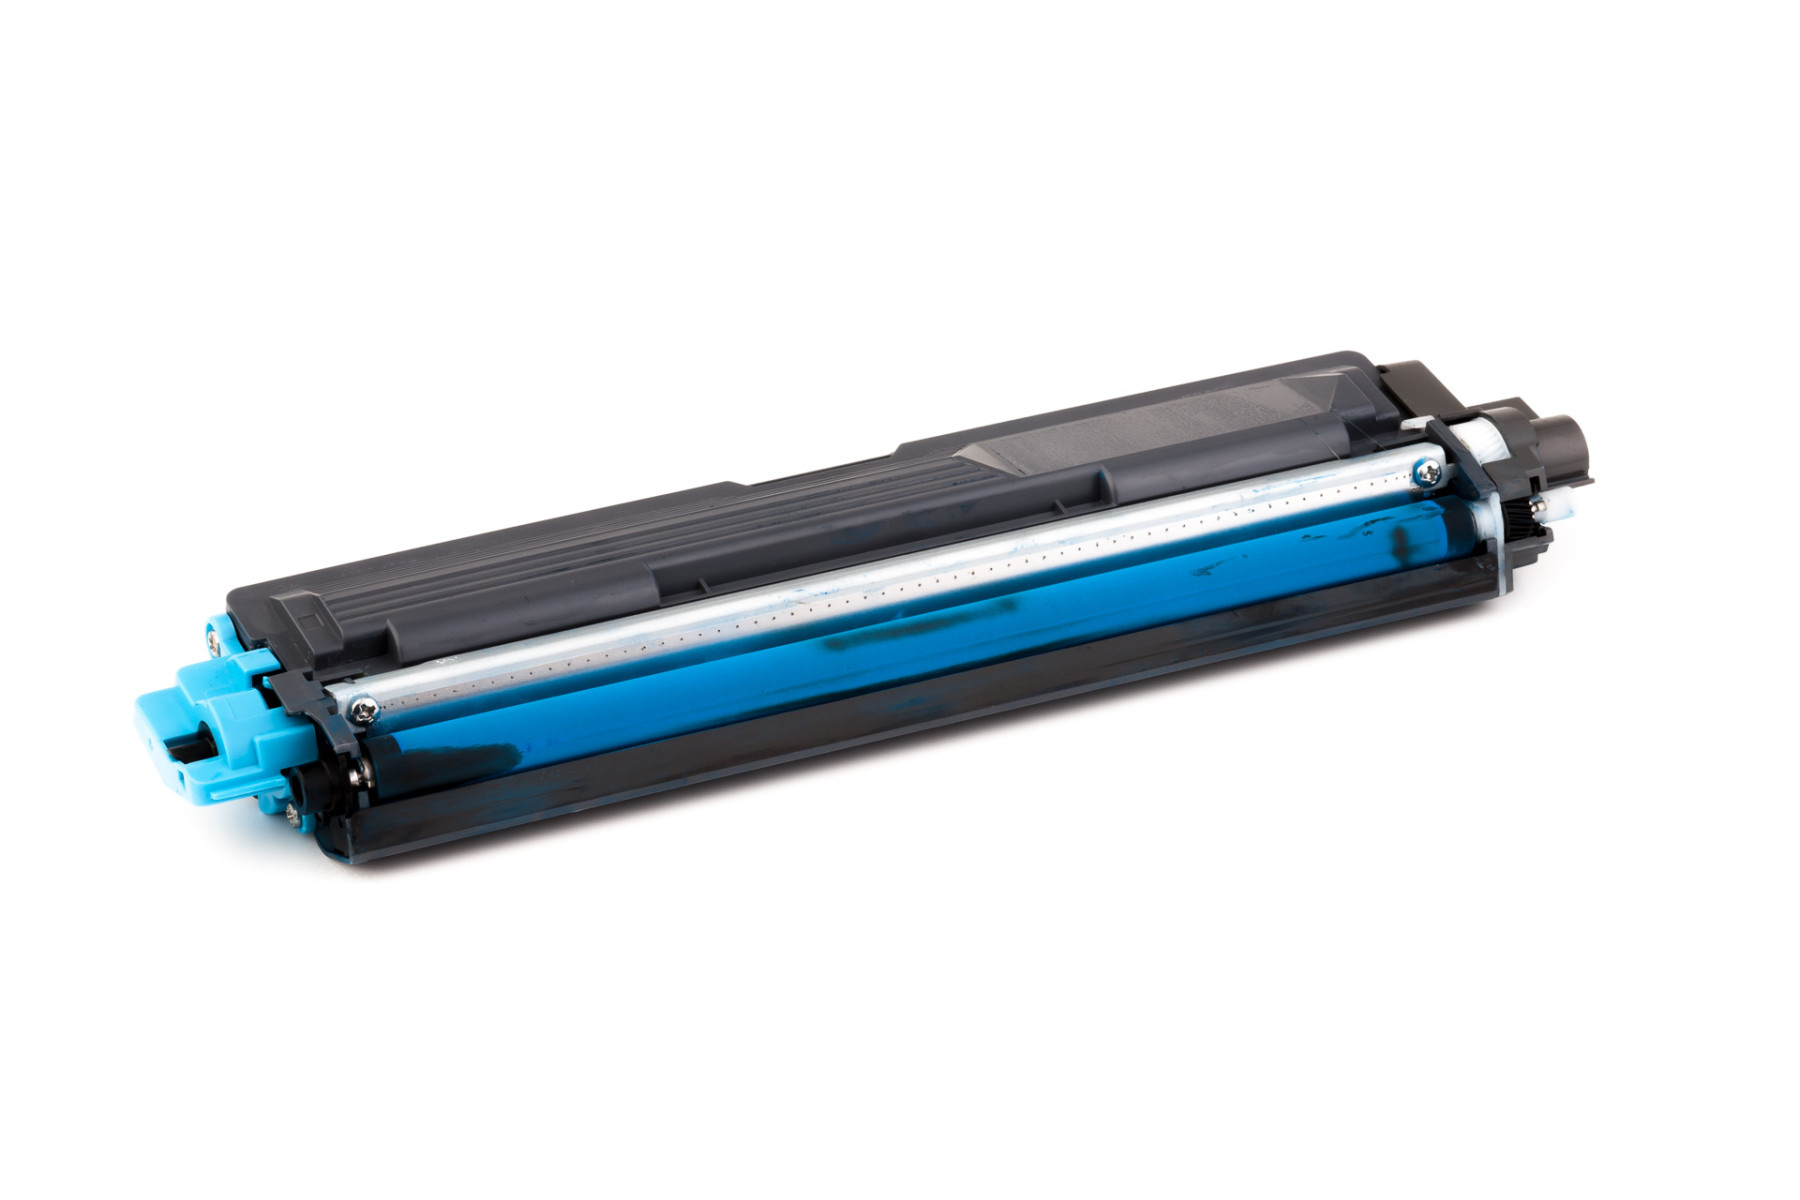 Set consisting of Toner cartridge (alternative) compatible with Brother - TN245C/TN-245 C - DCP-9020 CDW cyan, TN245M/TN-245 M - DCP-9020 CDW magenta, TN245Y/TN-245 Y - DCP-9020 CDW yellow - Save 6%